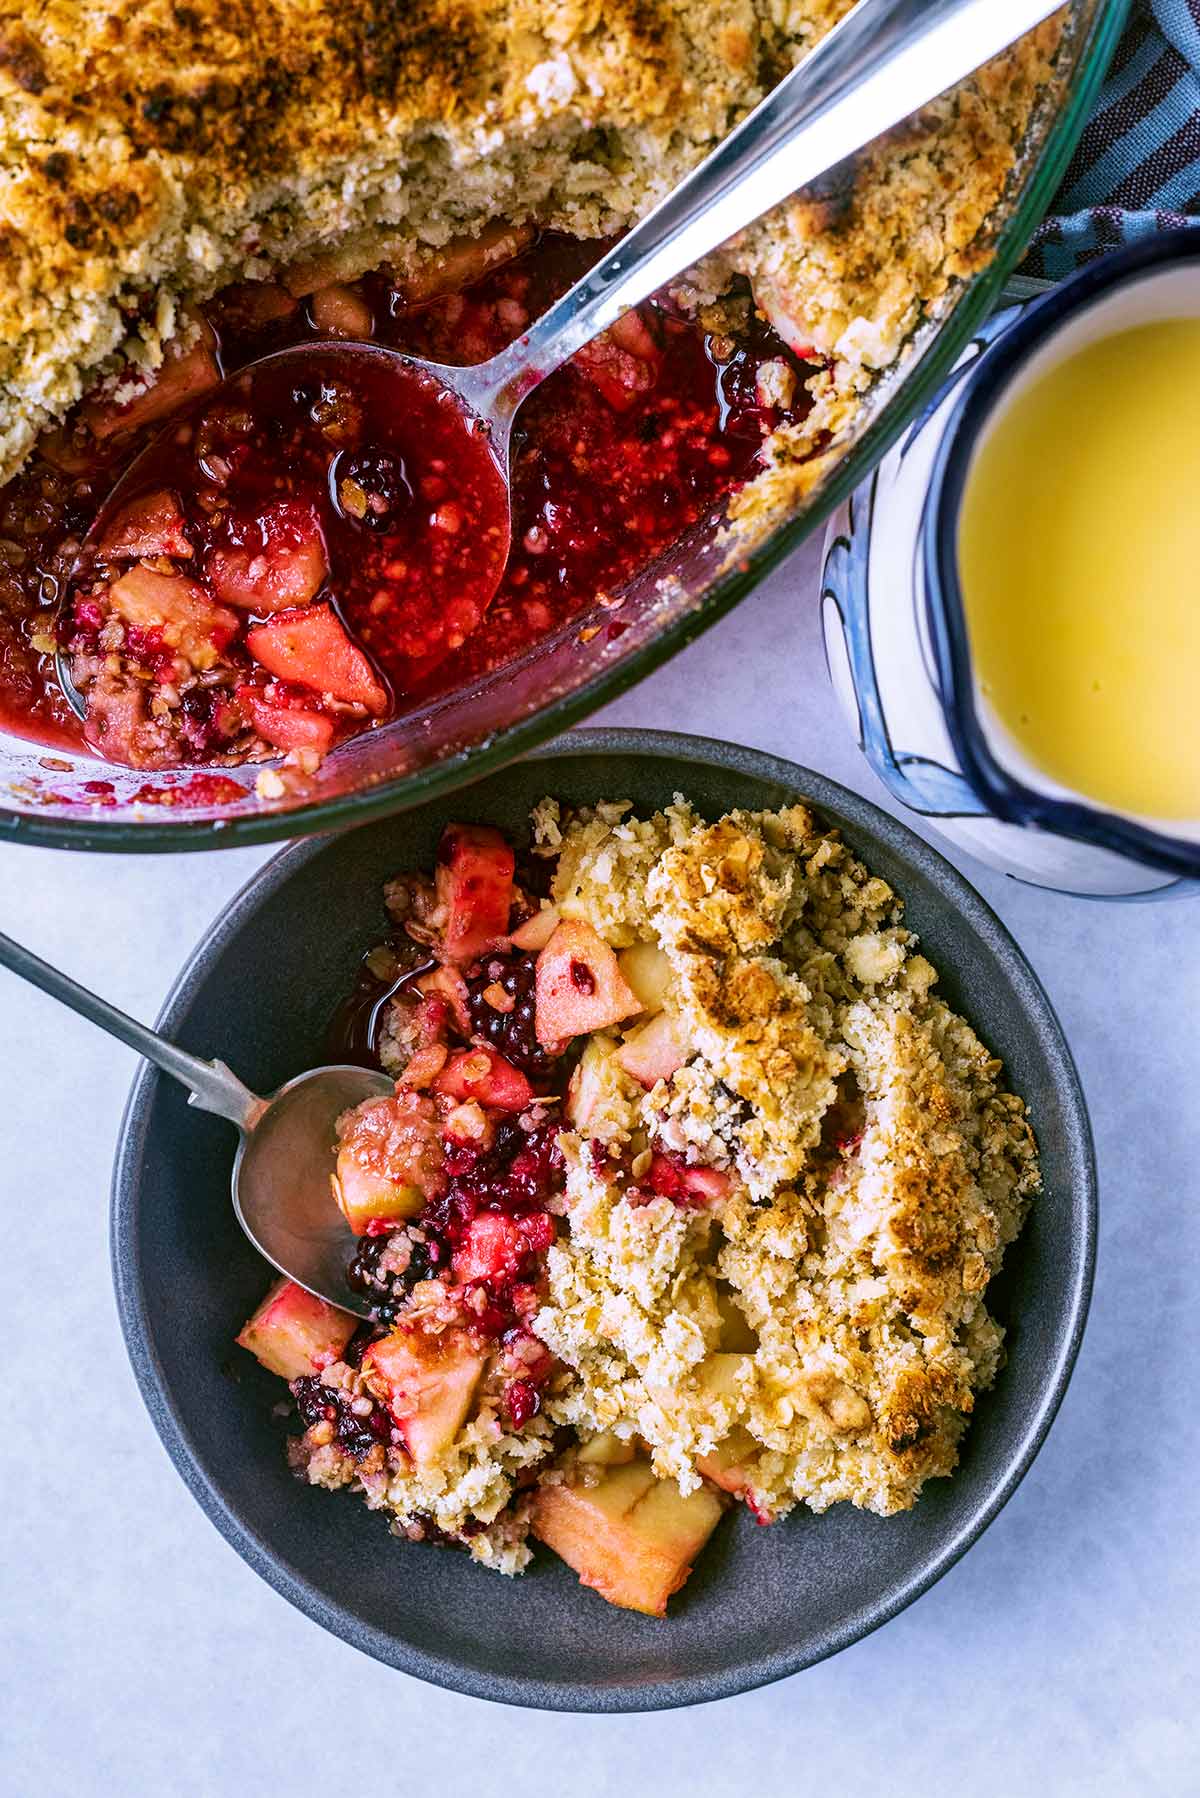 A bowl of fruit crumble next to a dish of more crumble and a jug of custard.